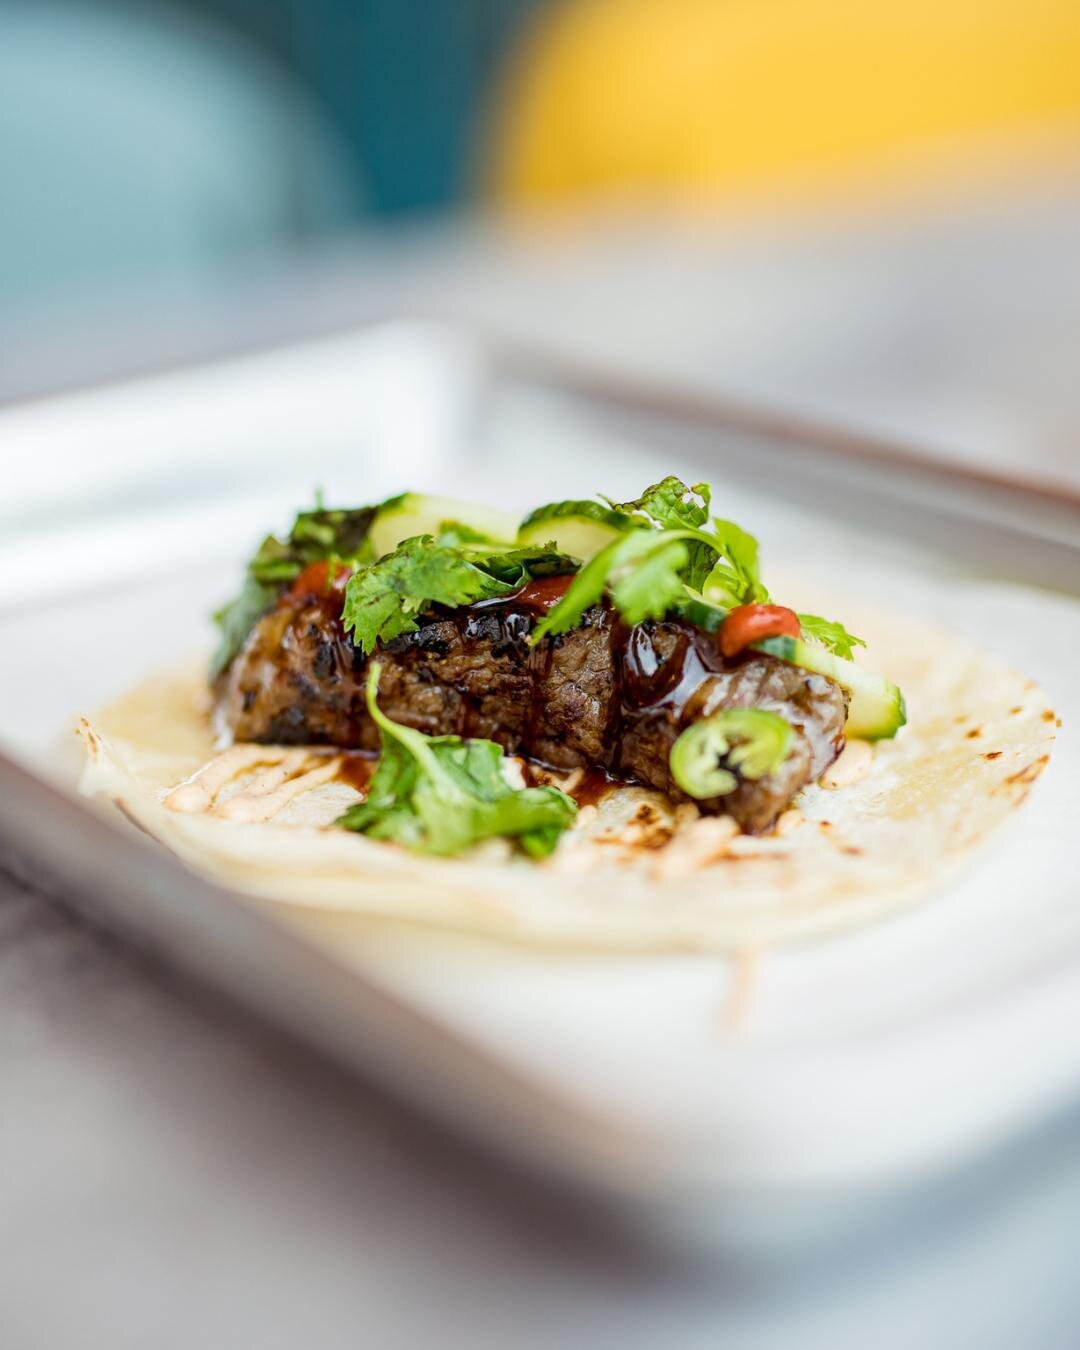 The Pho Beef Taco: Grilled steak with a killer pho aioli, organic green cabbage, pickled cucumber, mint, cilantro, and Thai basil on a fresh flour tortilla. ⁠
⁠
Join us for tacos this weekend. RSVP at the link in our bio. ⁠
⁠
⁠
⁠
⁠
⁠
⁠
#puretaco #myp